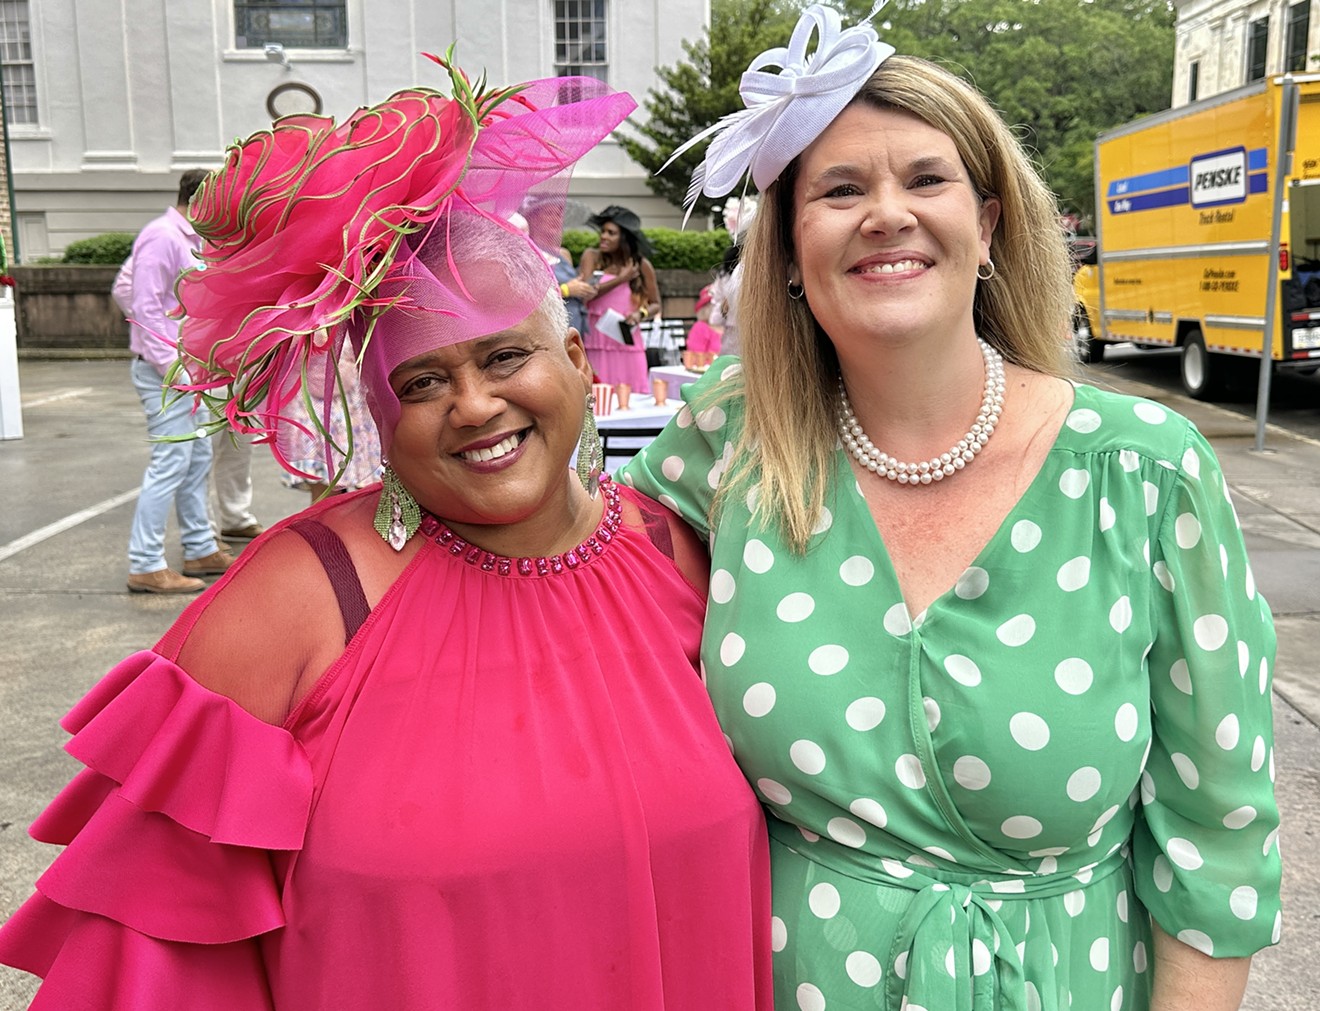 4th Annual Olde Pink House Kentucky Derby Party Benefitting Park Place Outreach